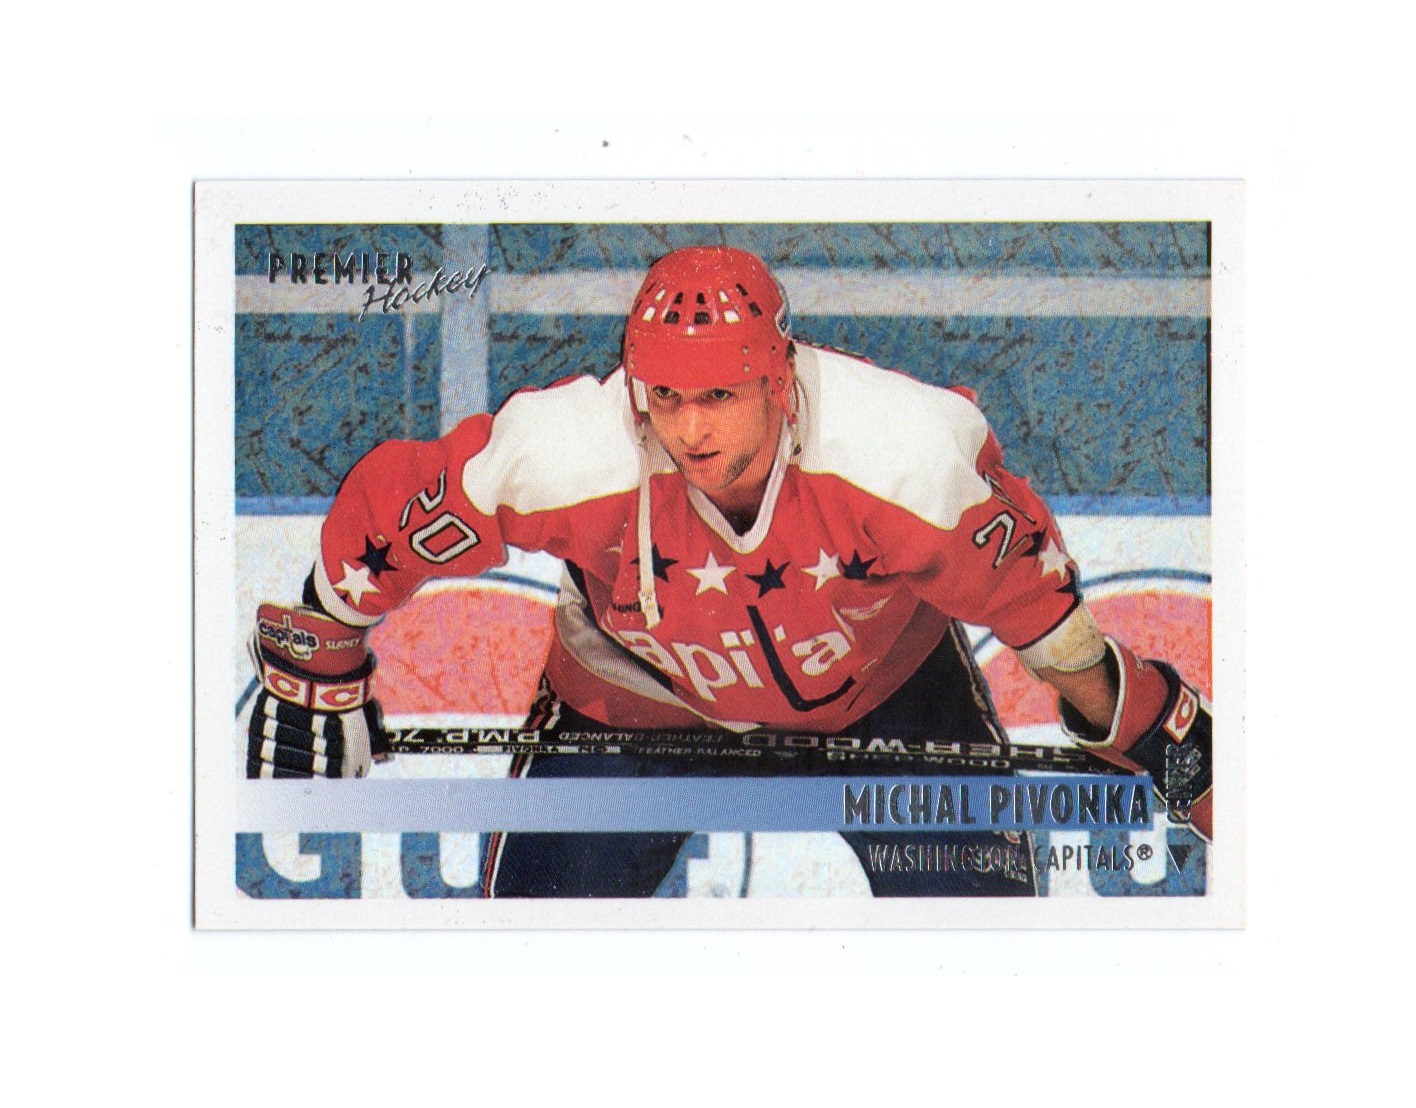 1994-95 OPC Premier Special Effects #259 Michal Pivonka (10-X249-CAPITALS)